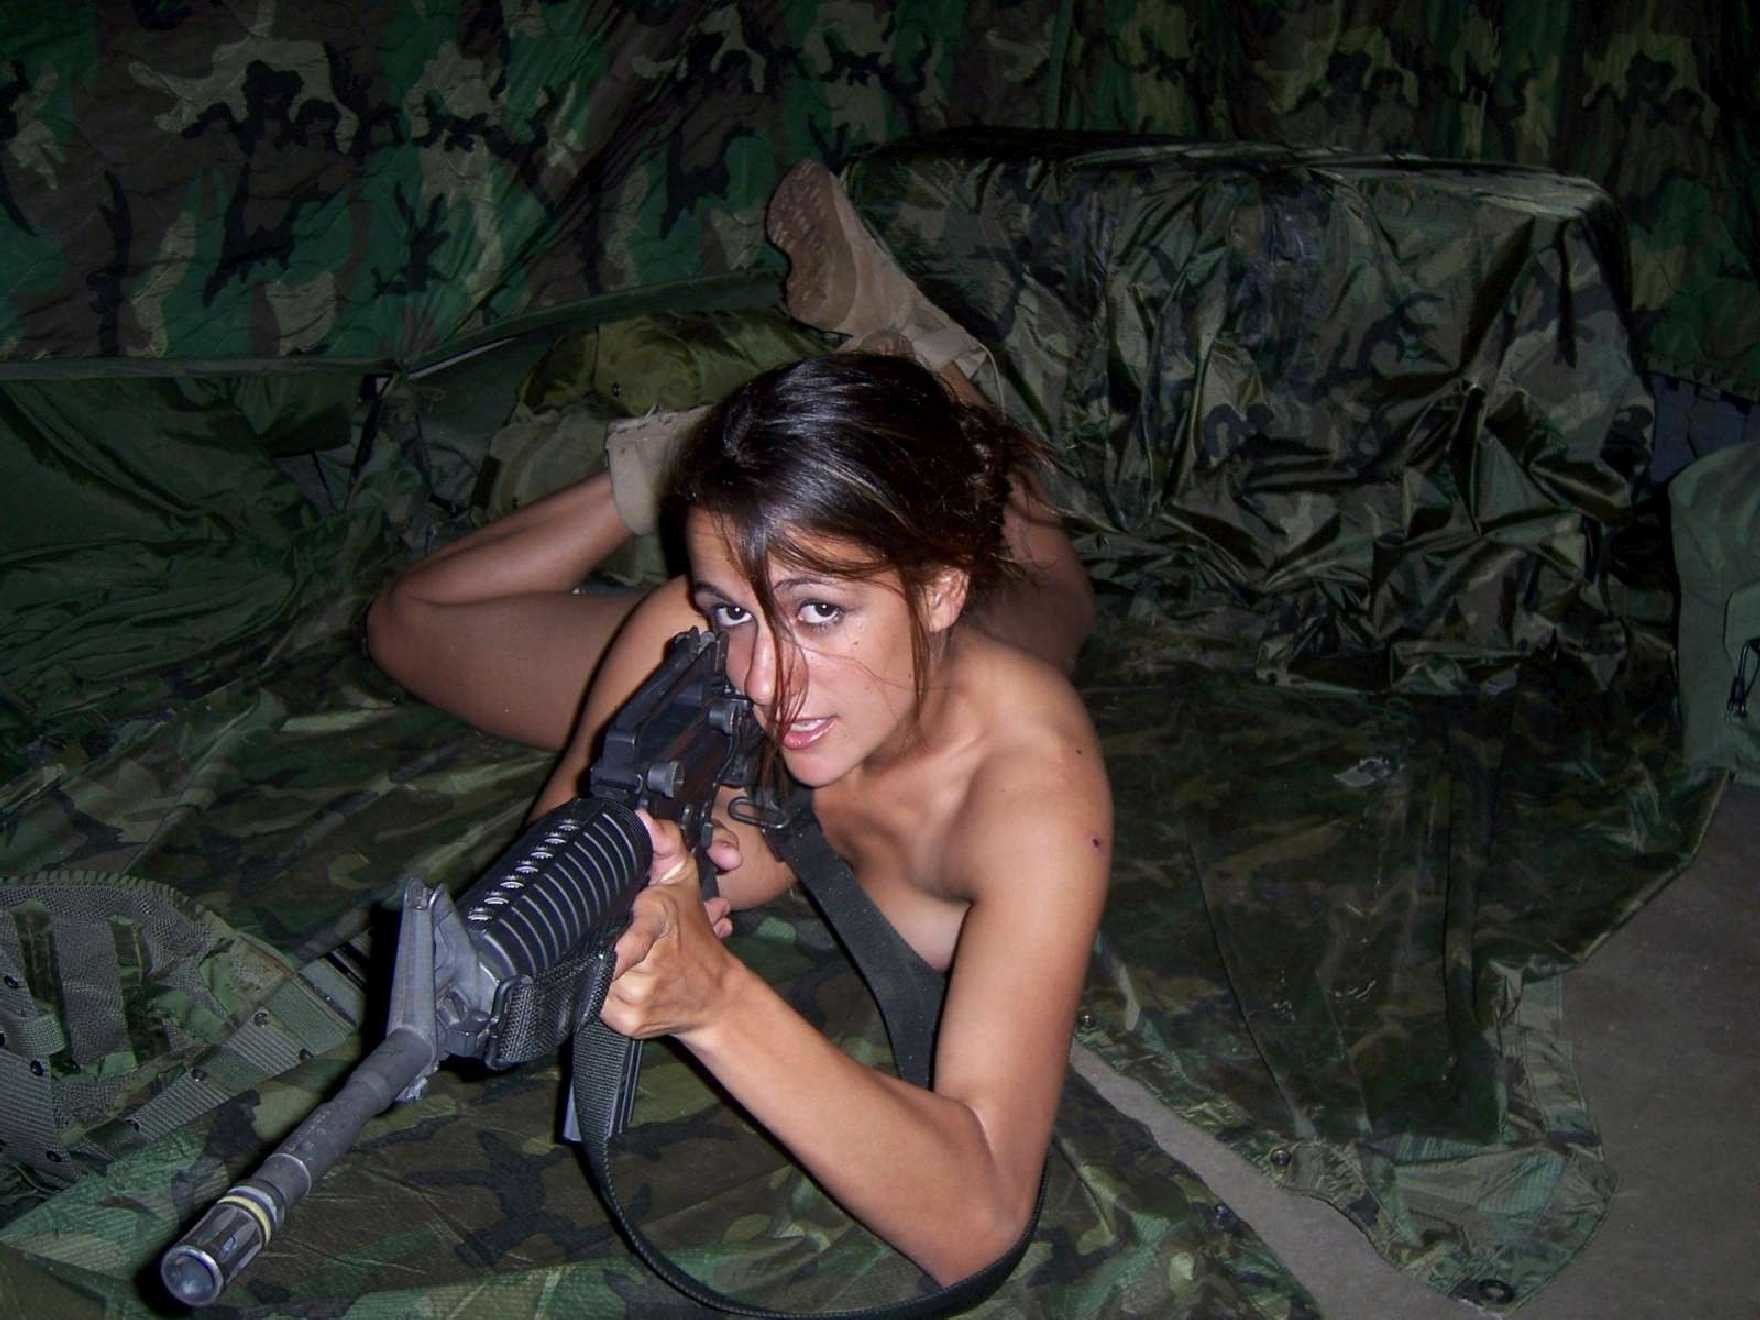 Naked women in military